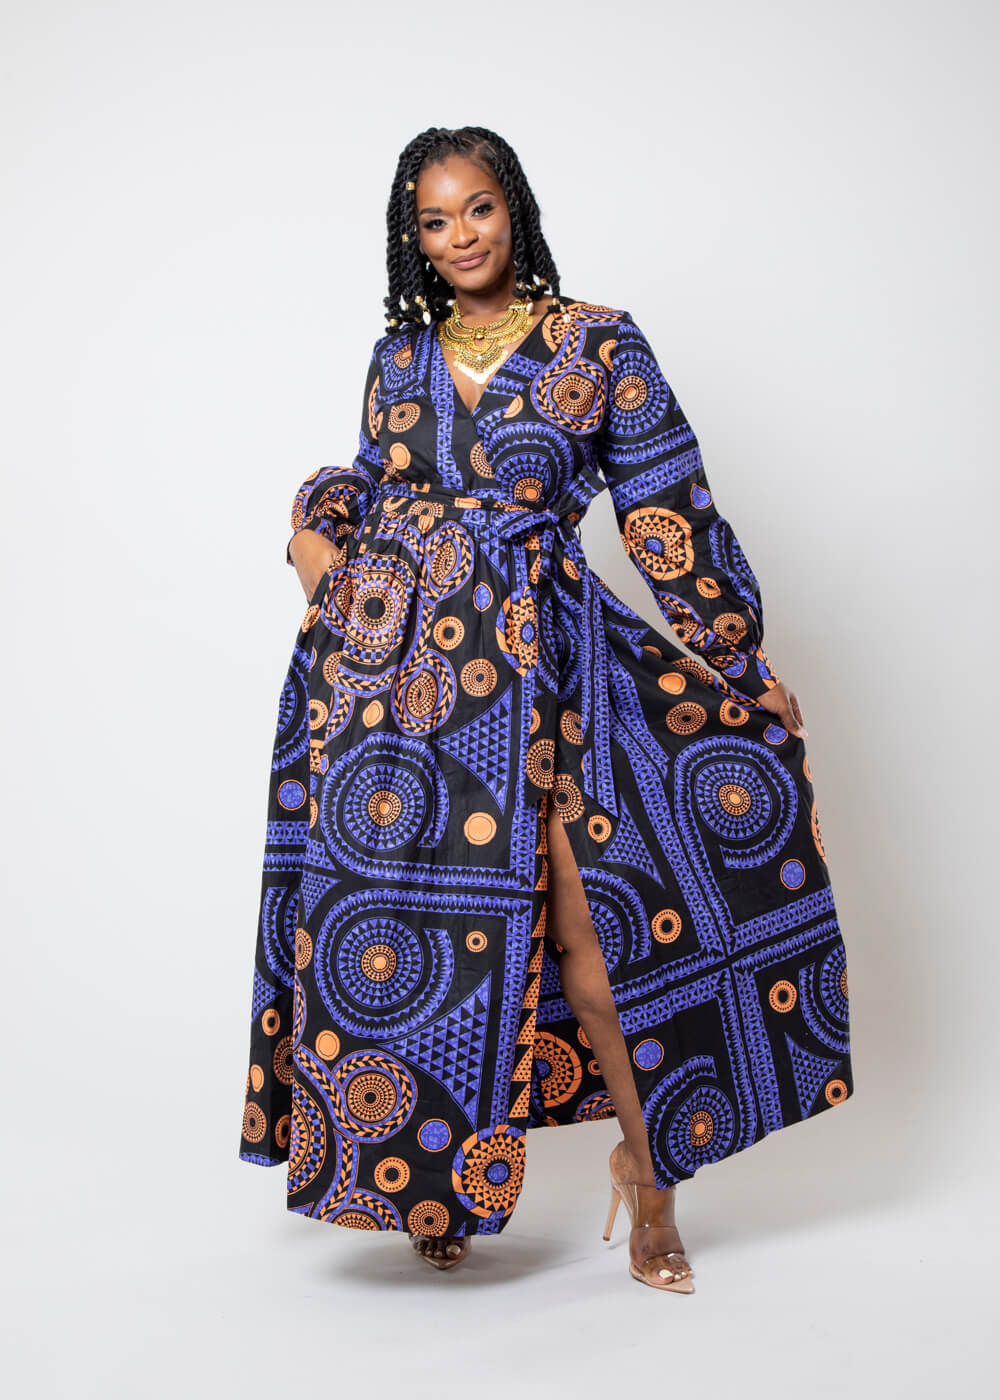 Style Tips to Make the Most of Your African Print Dress